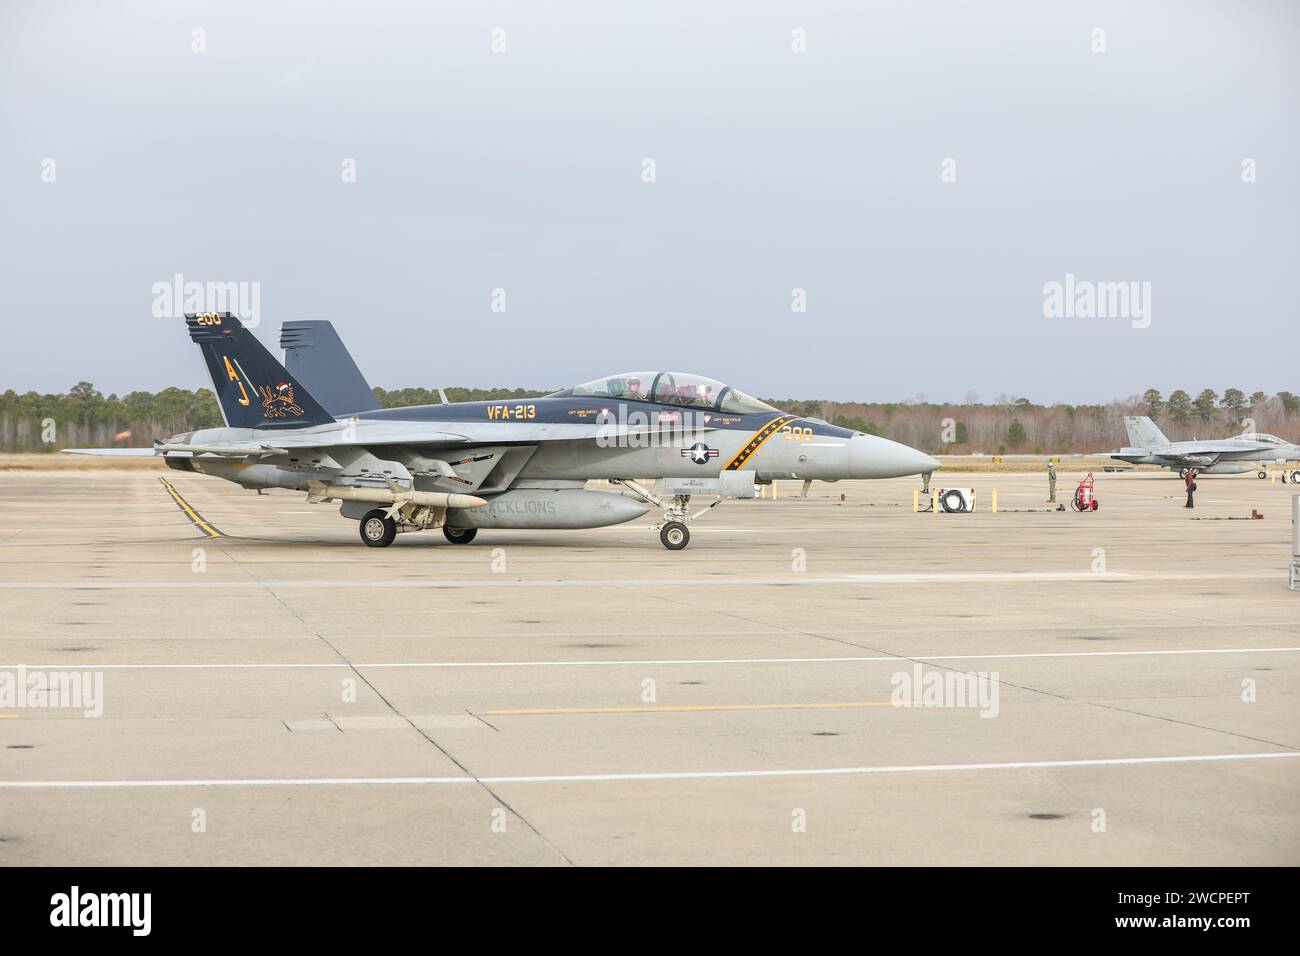 240115-N-YM590-1087 VIRGINIA BEACH, Va. (Jan. 15, 2024)- An F/A-18F Super Hornet, assigned to the “Fighting Blacklions” of Strike Fighter Squadron (VFA) 213, taxis on the flightline after returning to Naval Air Station Oceana in Virginia, Jan. 15, following a more than eight-month deployment with the Gerald R. Ford Carrier Strike Group. While deployed, the squadron accomplished 1,943 sorties covering 3,137 flight hours with a 97% sortie completion rate. (U.S. Navy photo by Chief Mass Communication Specialist Brian M. Brooks) Stock Photo